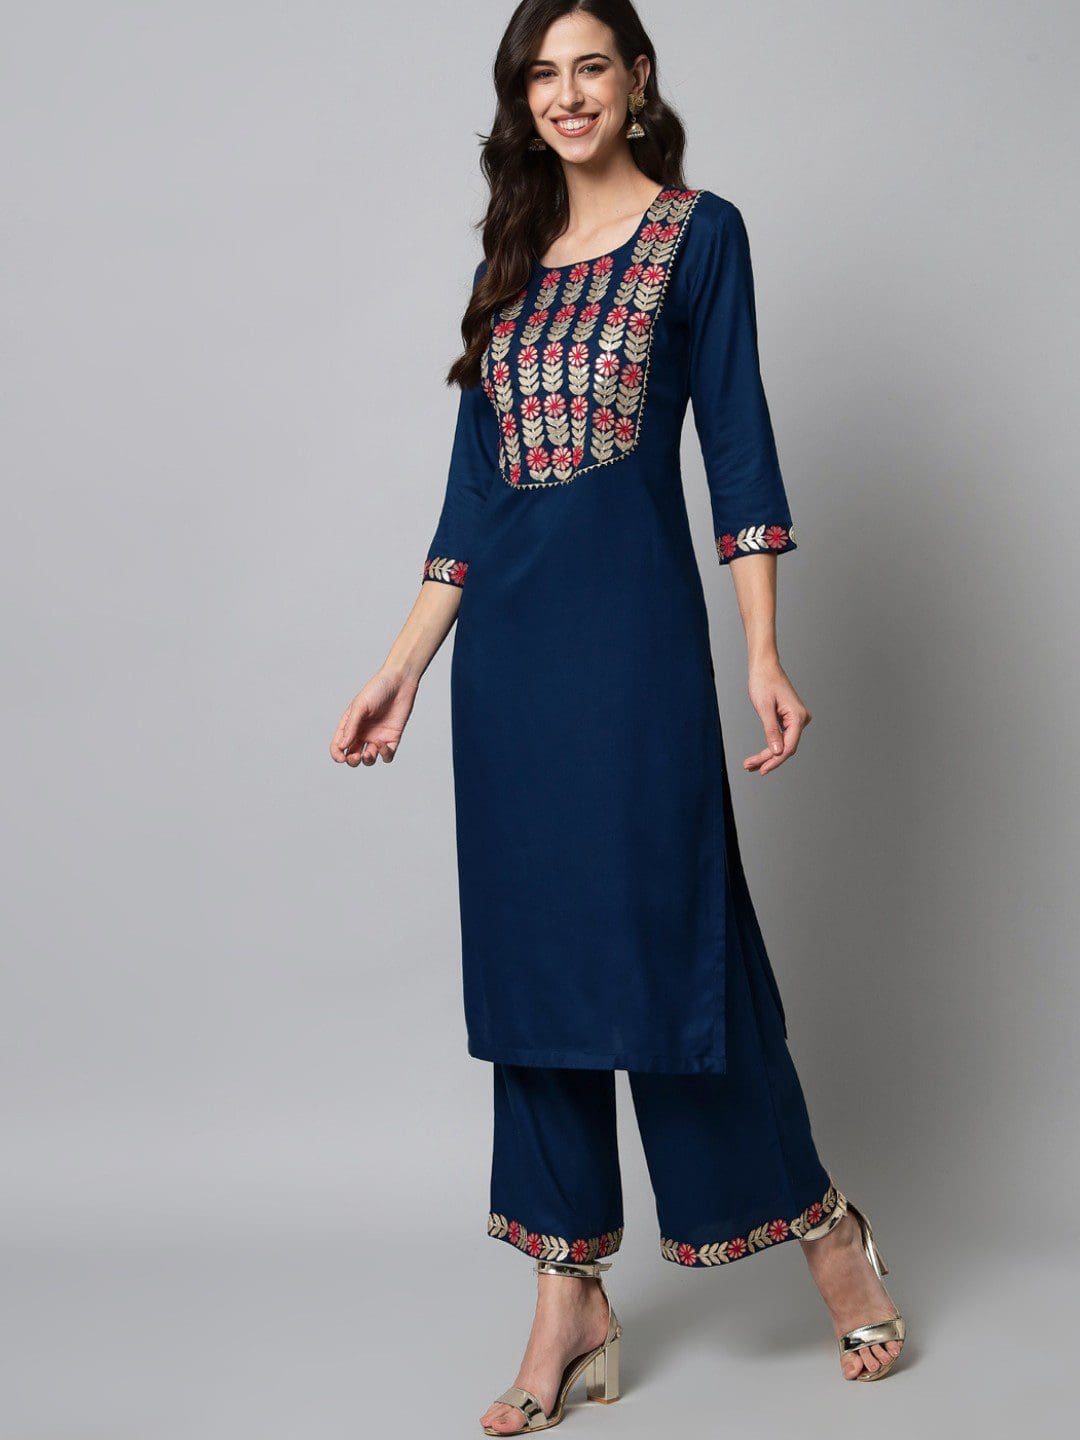 Exclusive Rayon Embroidery Kurti Teal Blue Colour With Palazzo For Women.